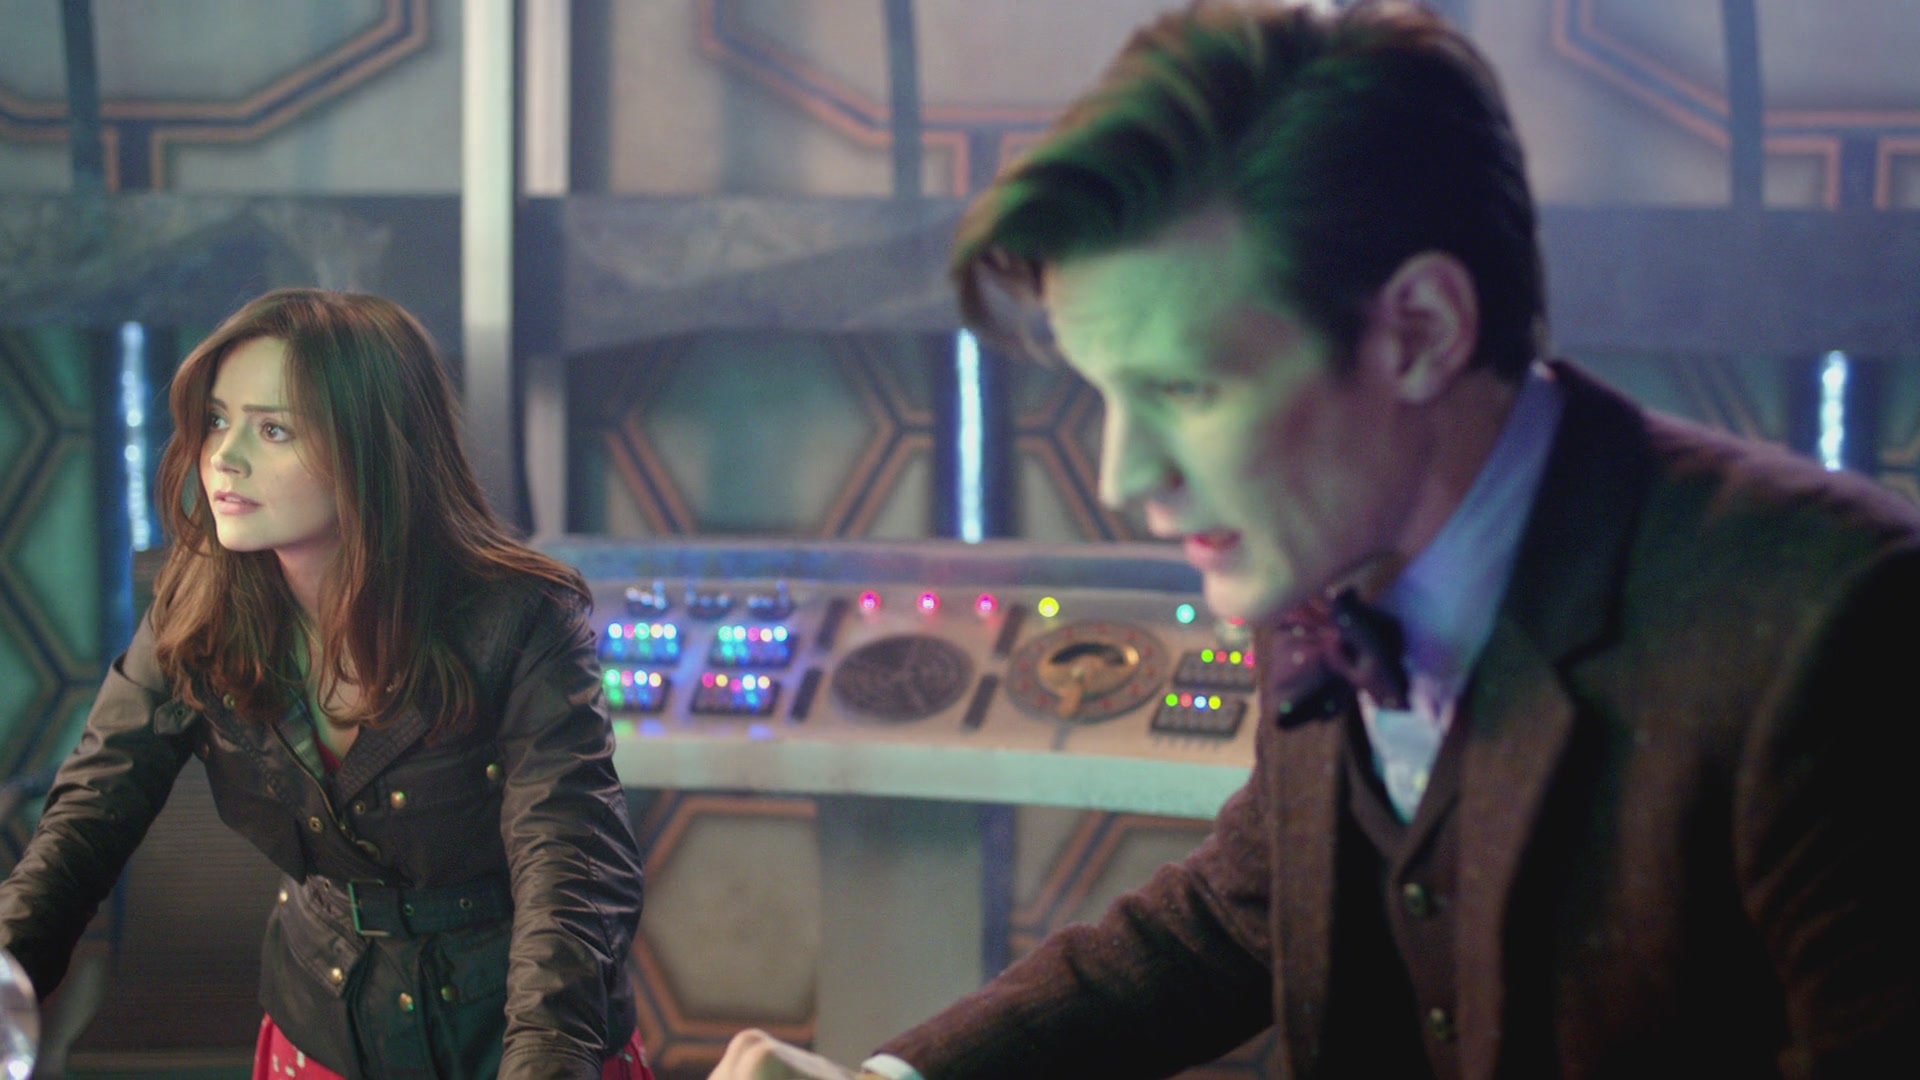 DayOfTheDoctor-Caps-0930.jpg